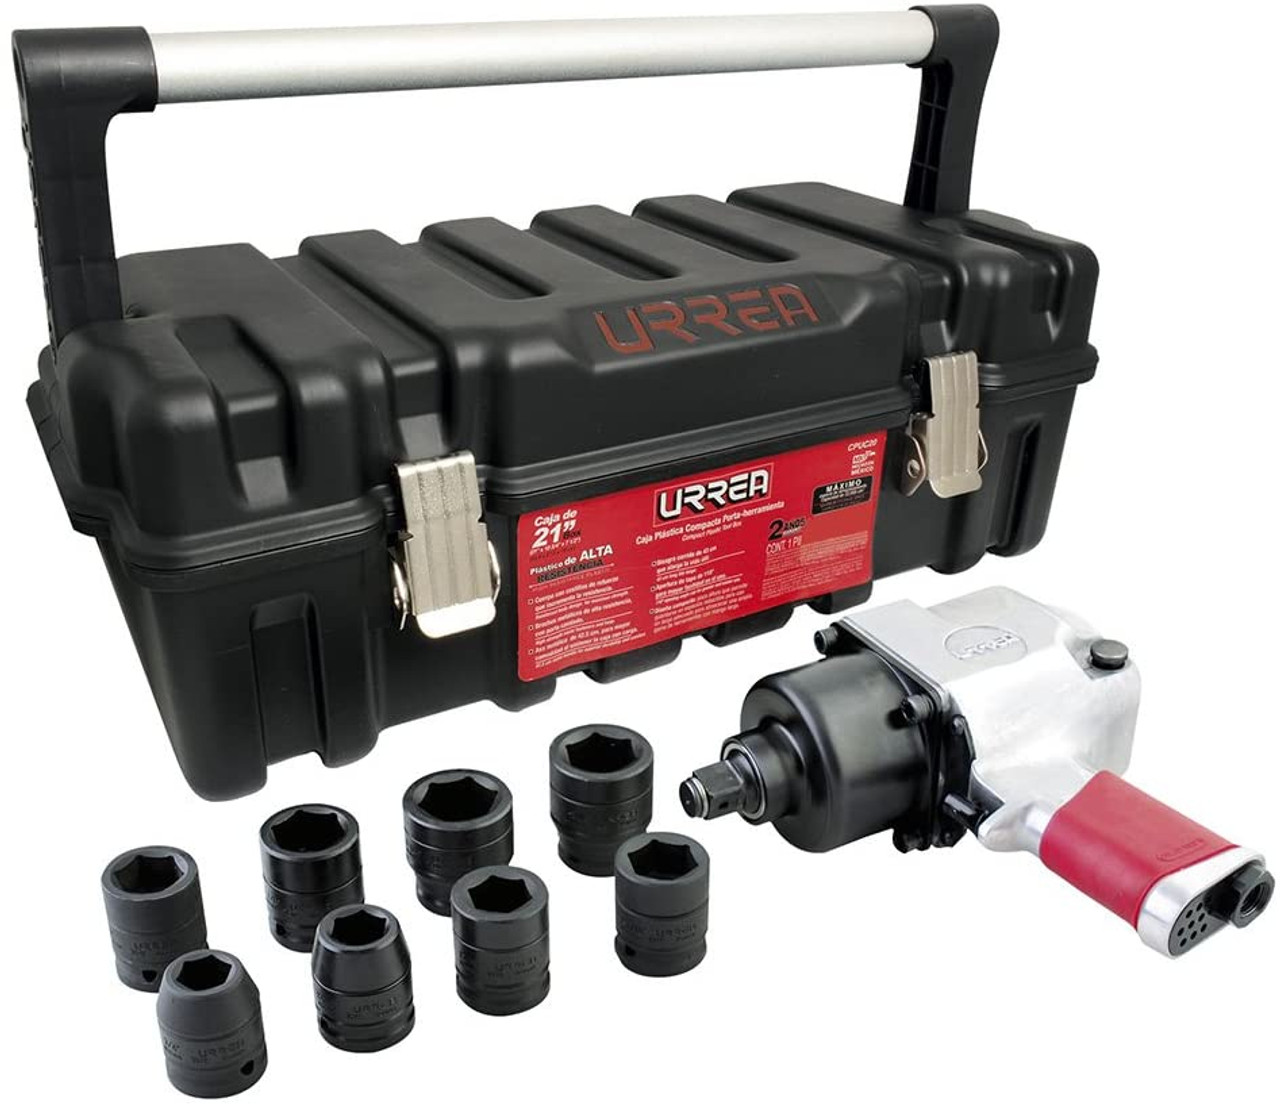 Twin Hammer 3/4" Drive Air Impact Wrench And Socket Set